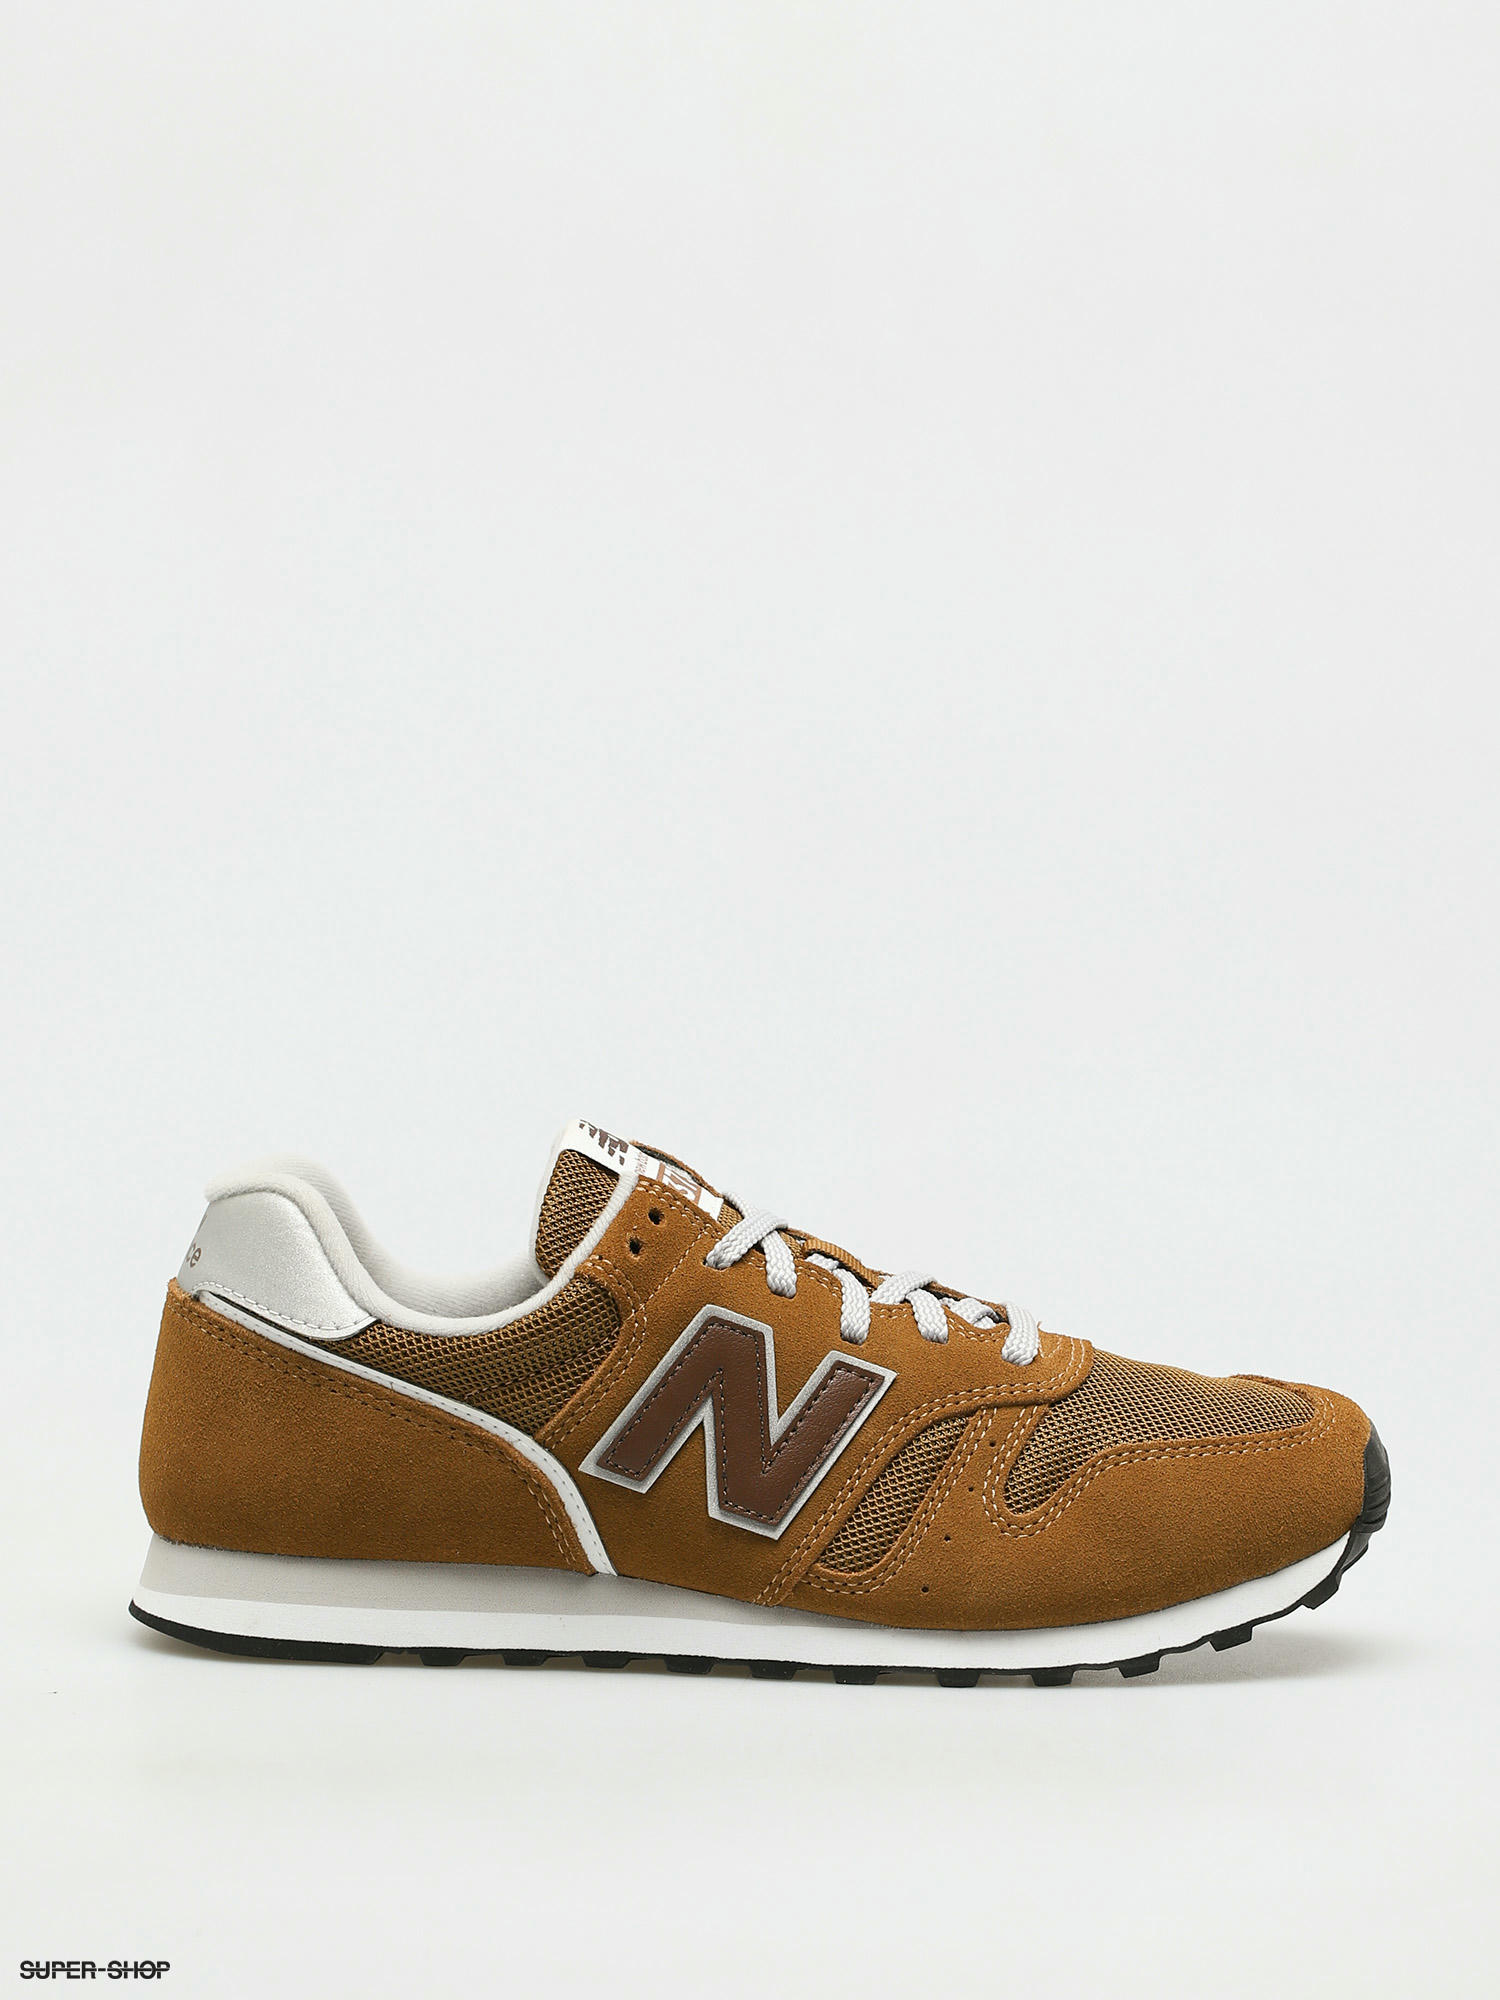 New Balance Shoes (brown)